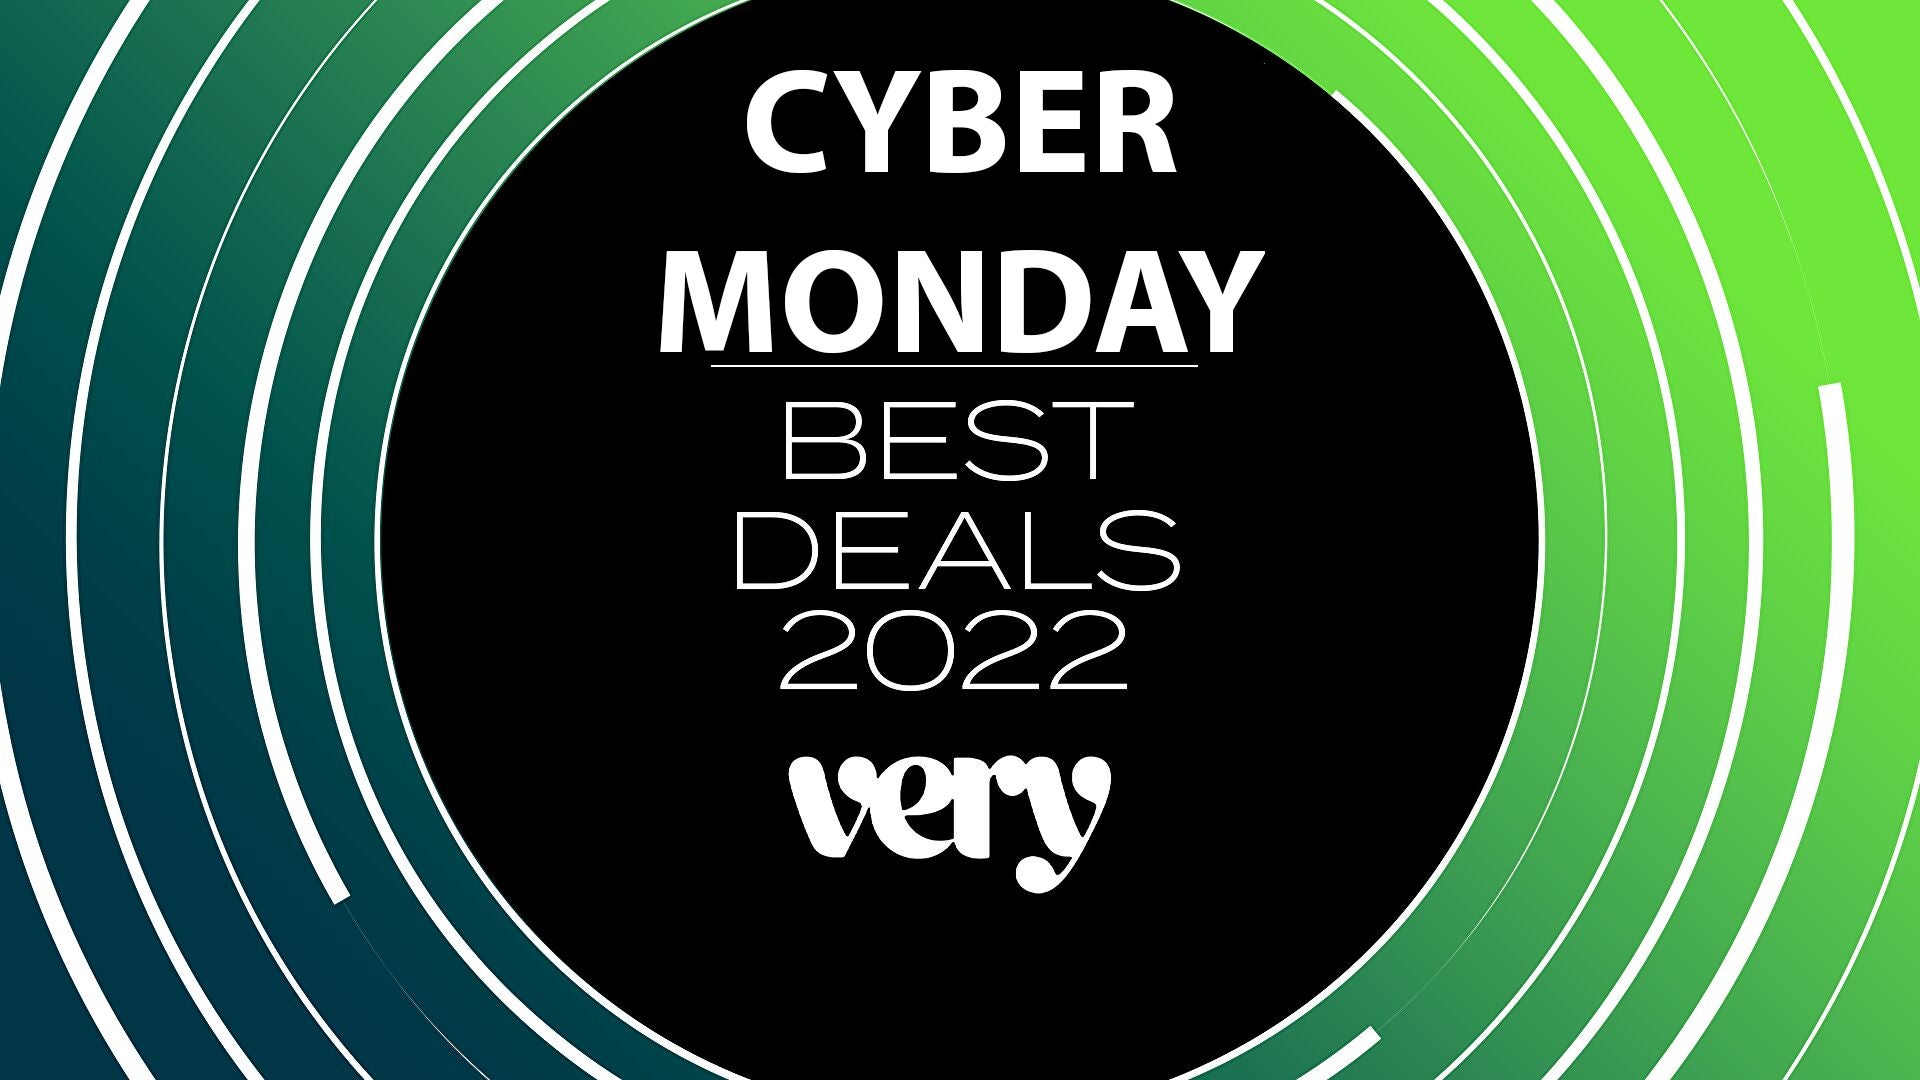 Image for Cyber Monday Very deals 2022: best offers and discounts